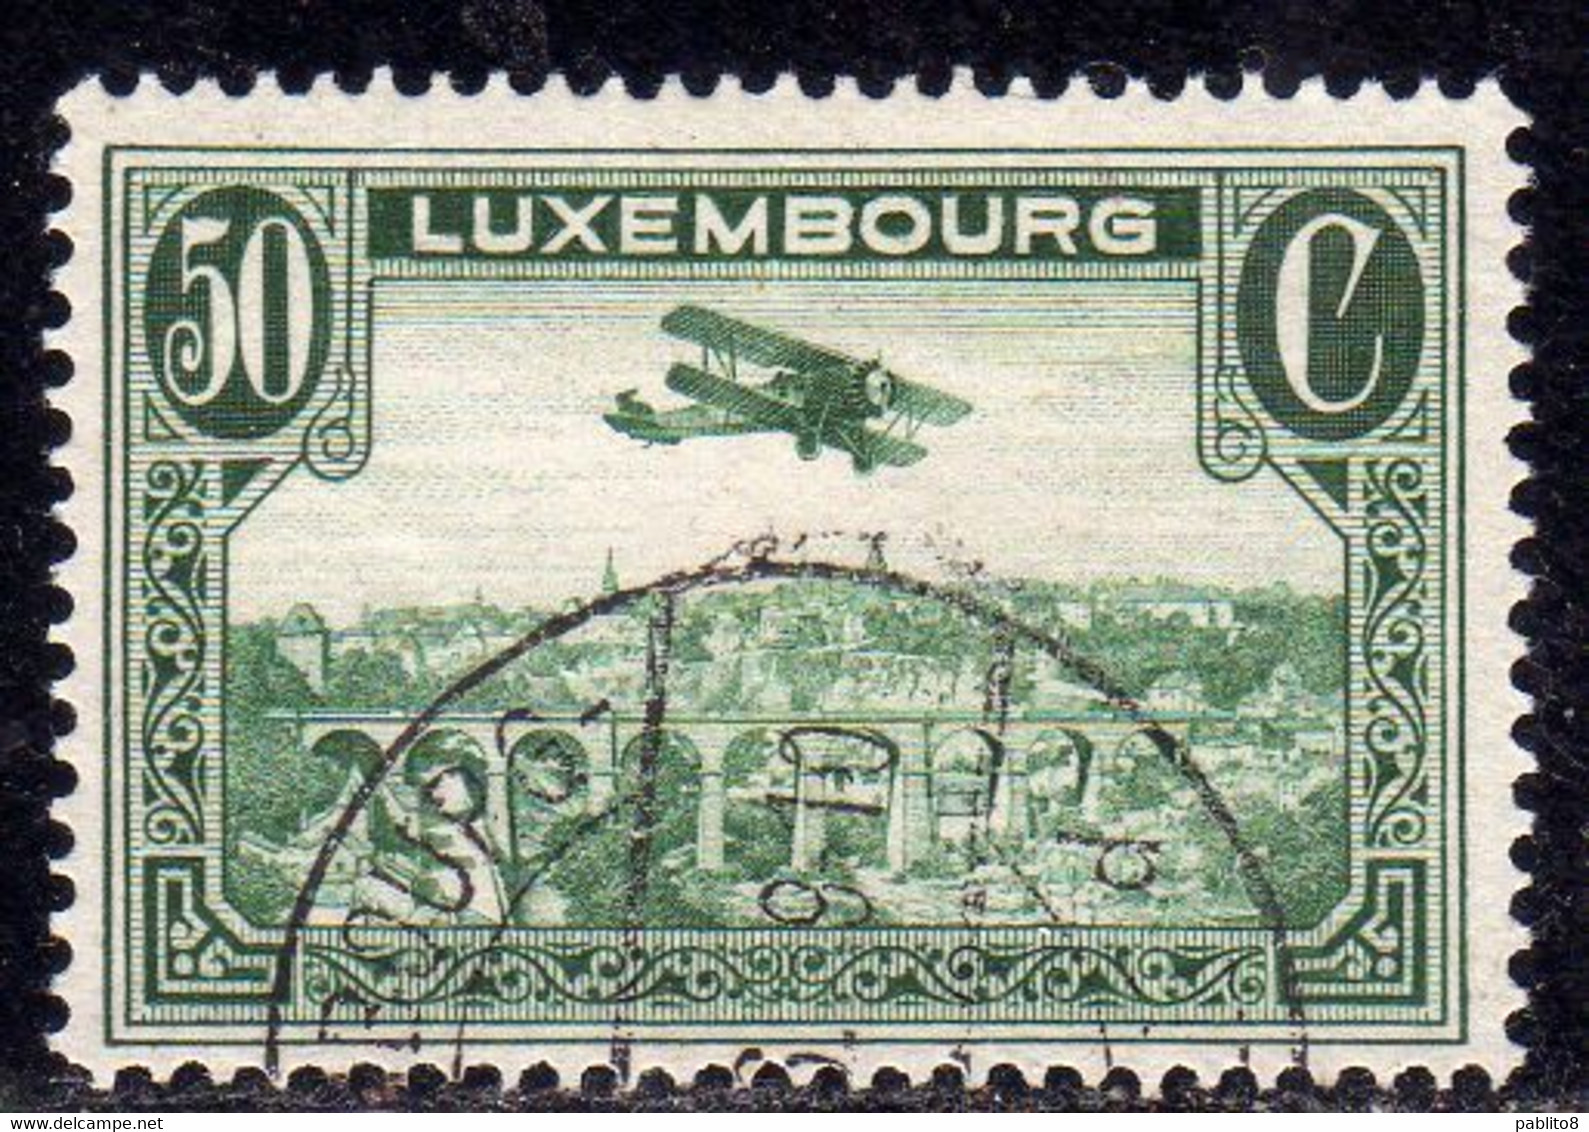 LUXEMBOURG LUSSEMBURGO 1931 1933 AIR POST STAMPS AIRMAIL AIRPLANE OVER POSTA AEREA CENT. 50c USED USATO OBLITERE' - Used Stamps